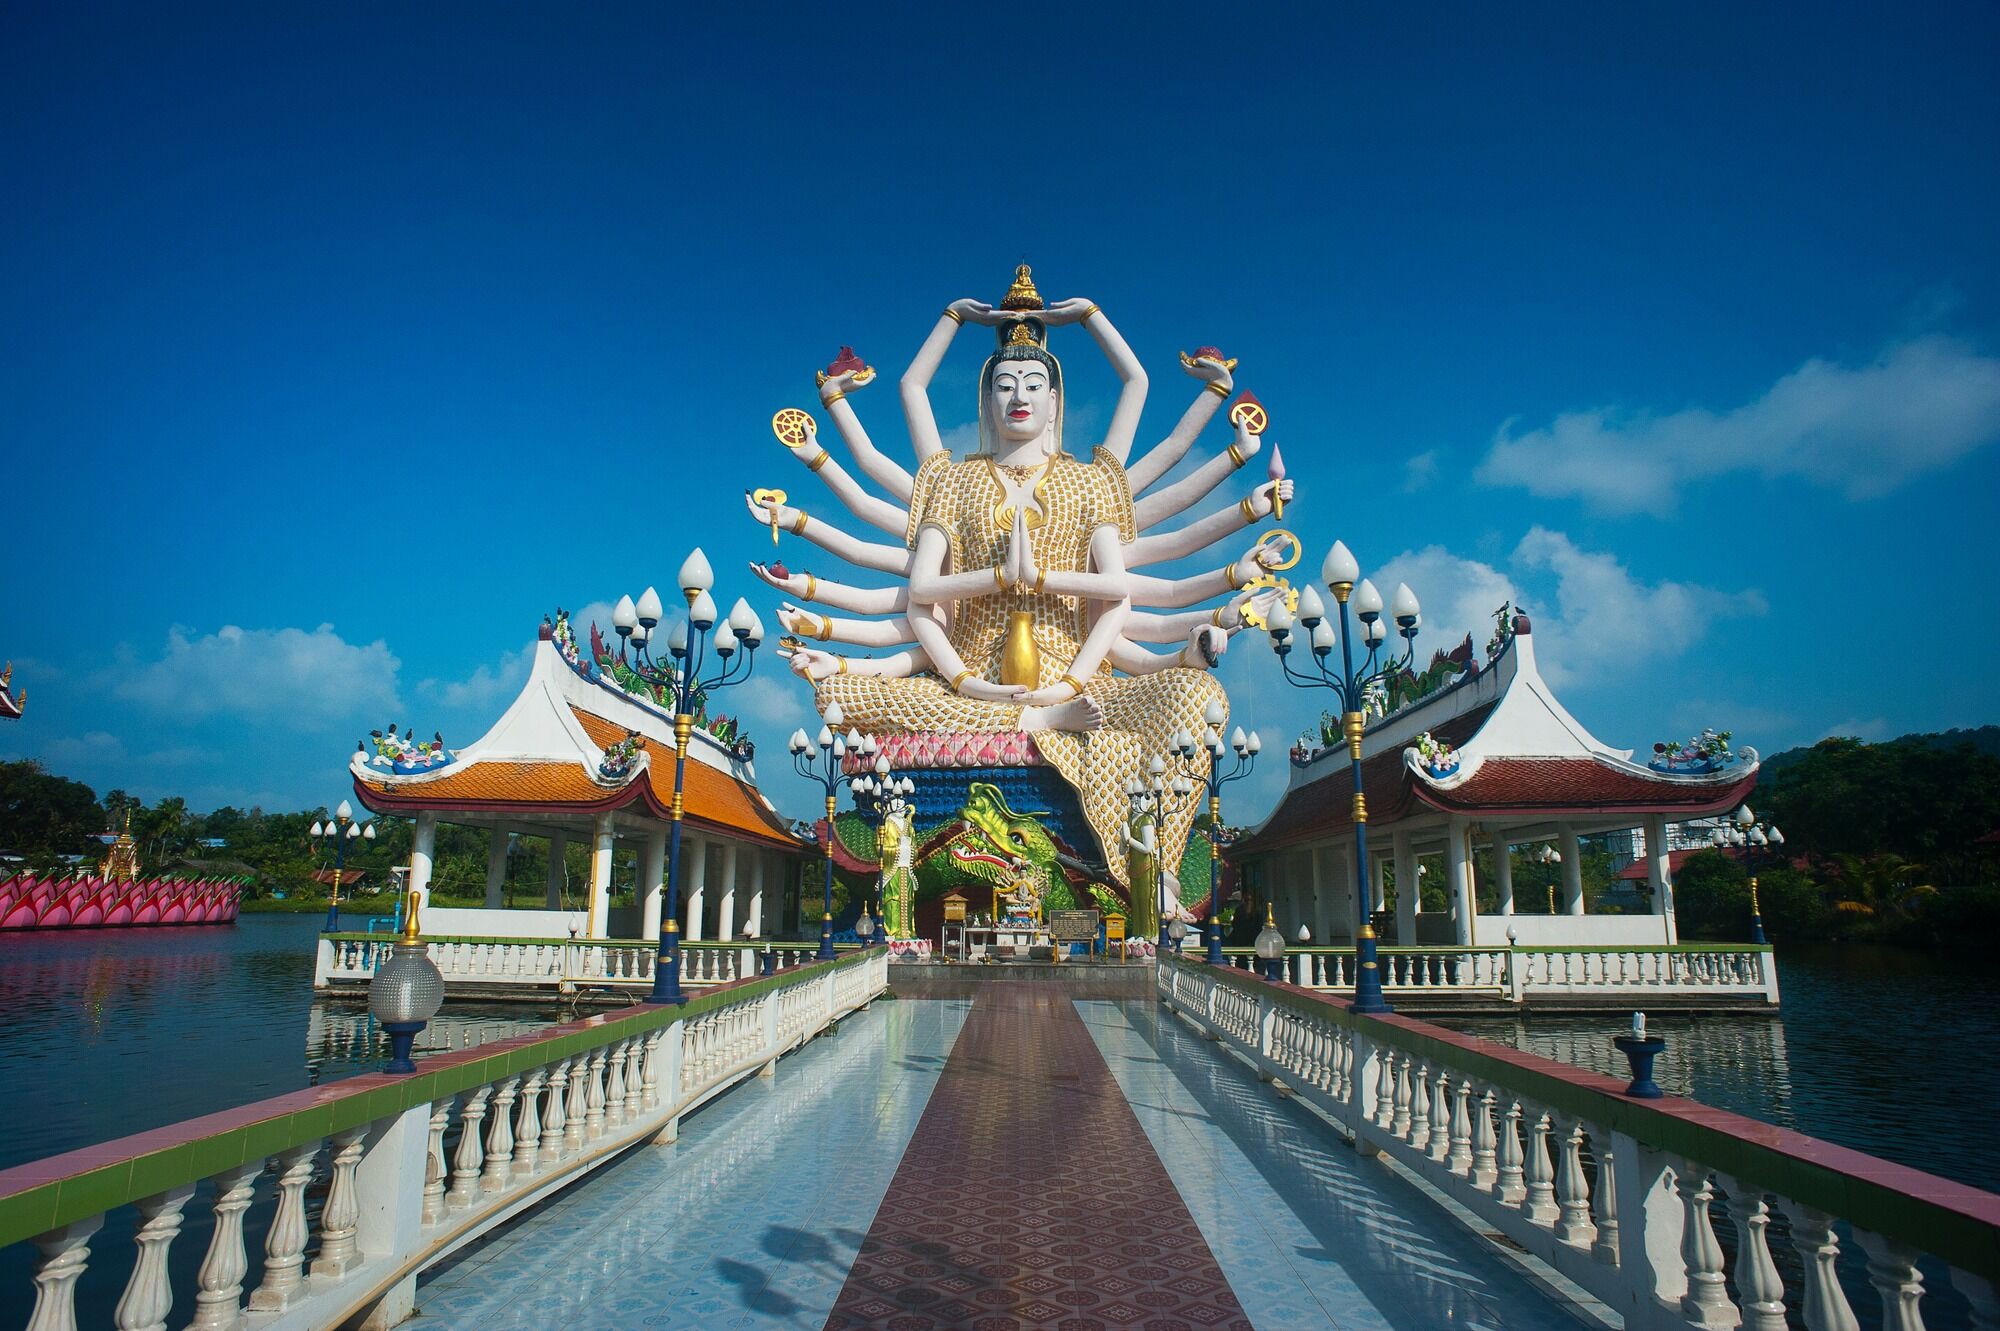 Cool hotels in Thailand: Top 8 magical places for wellness and spiritual practices